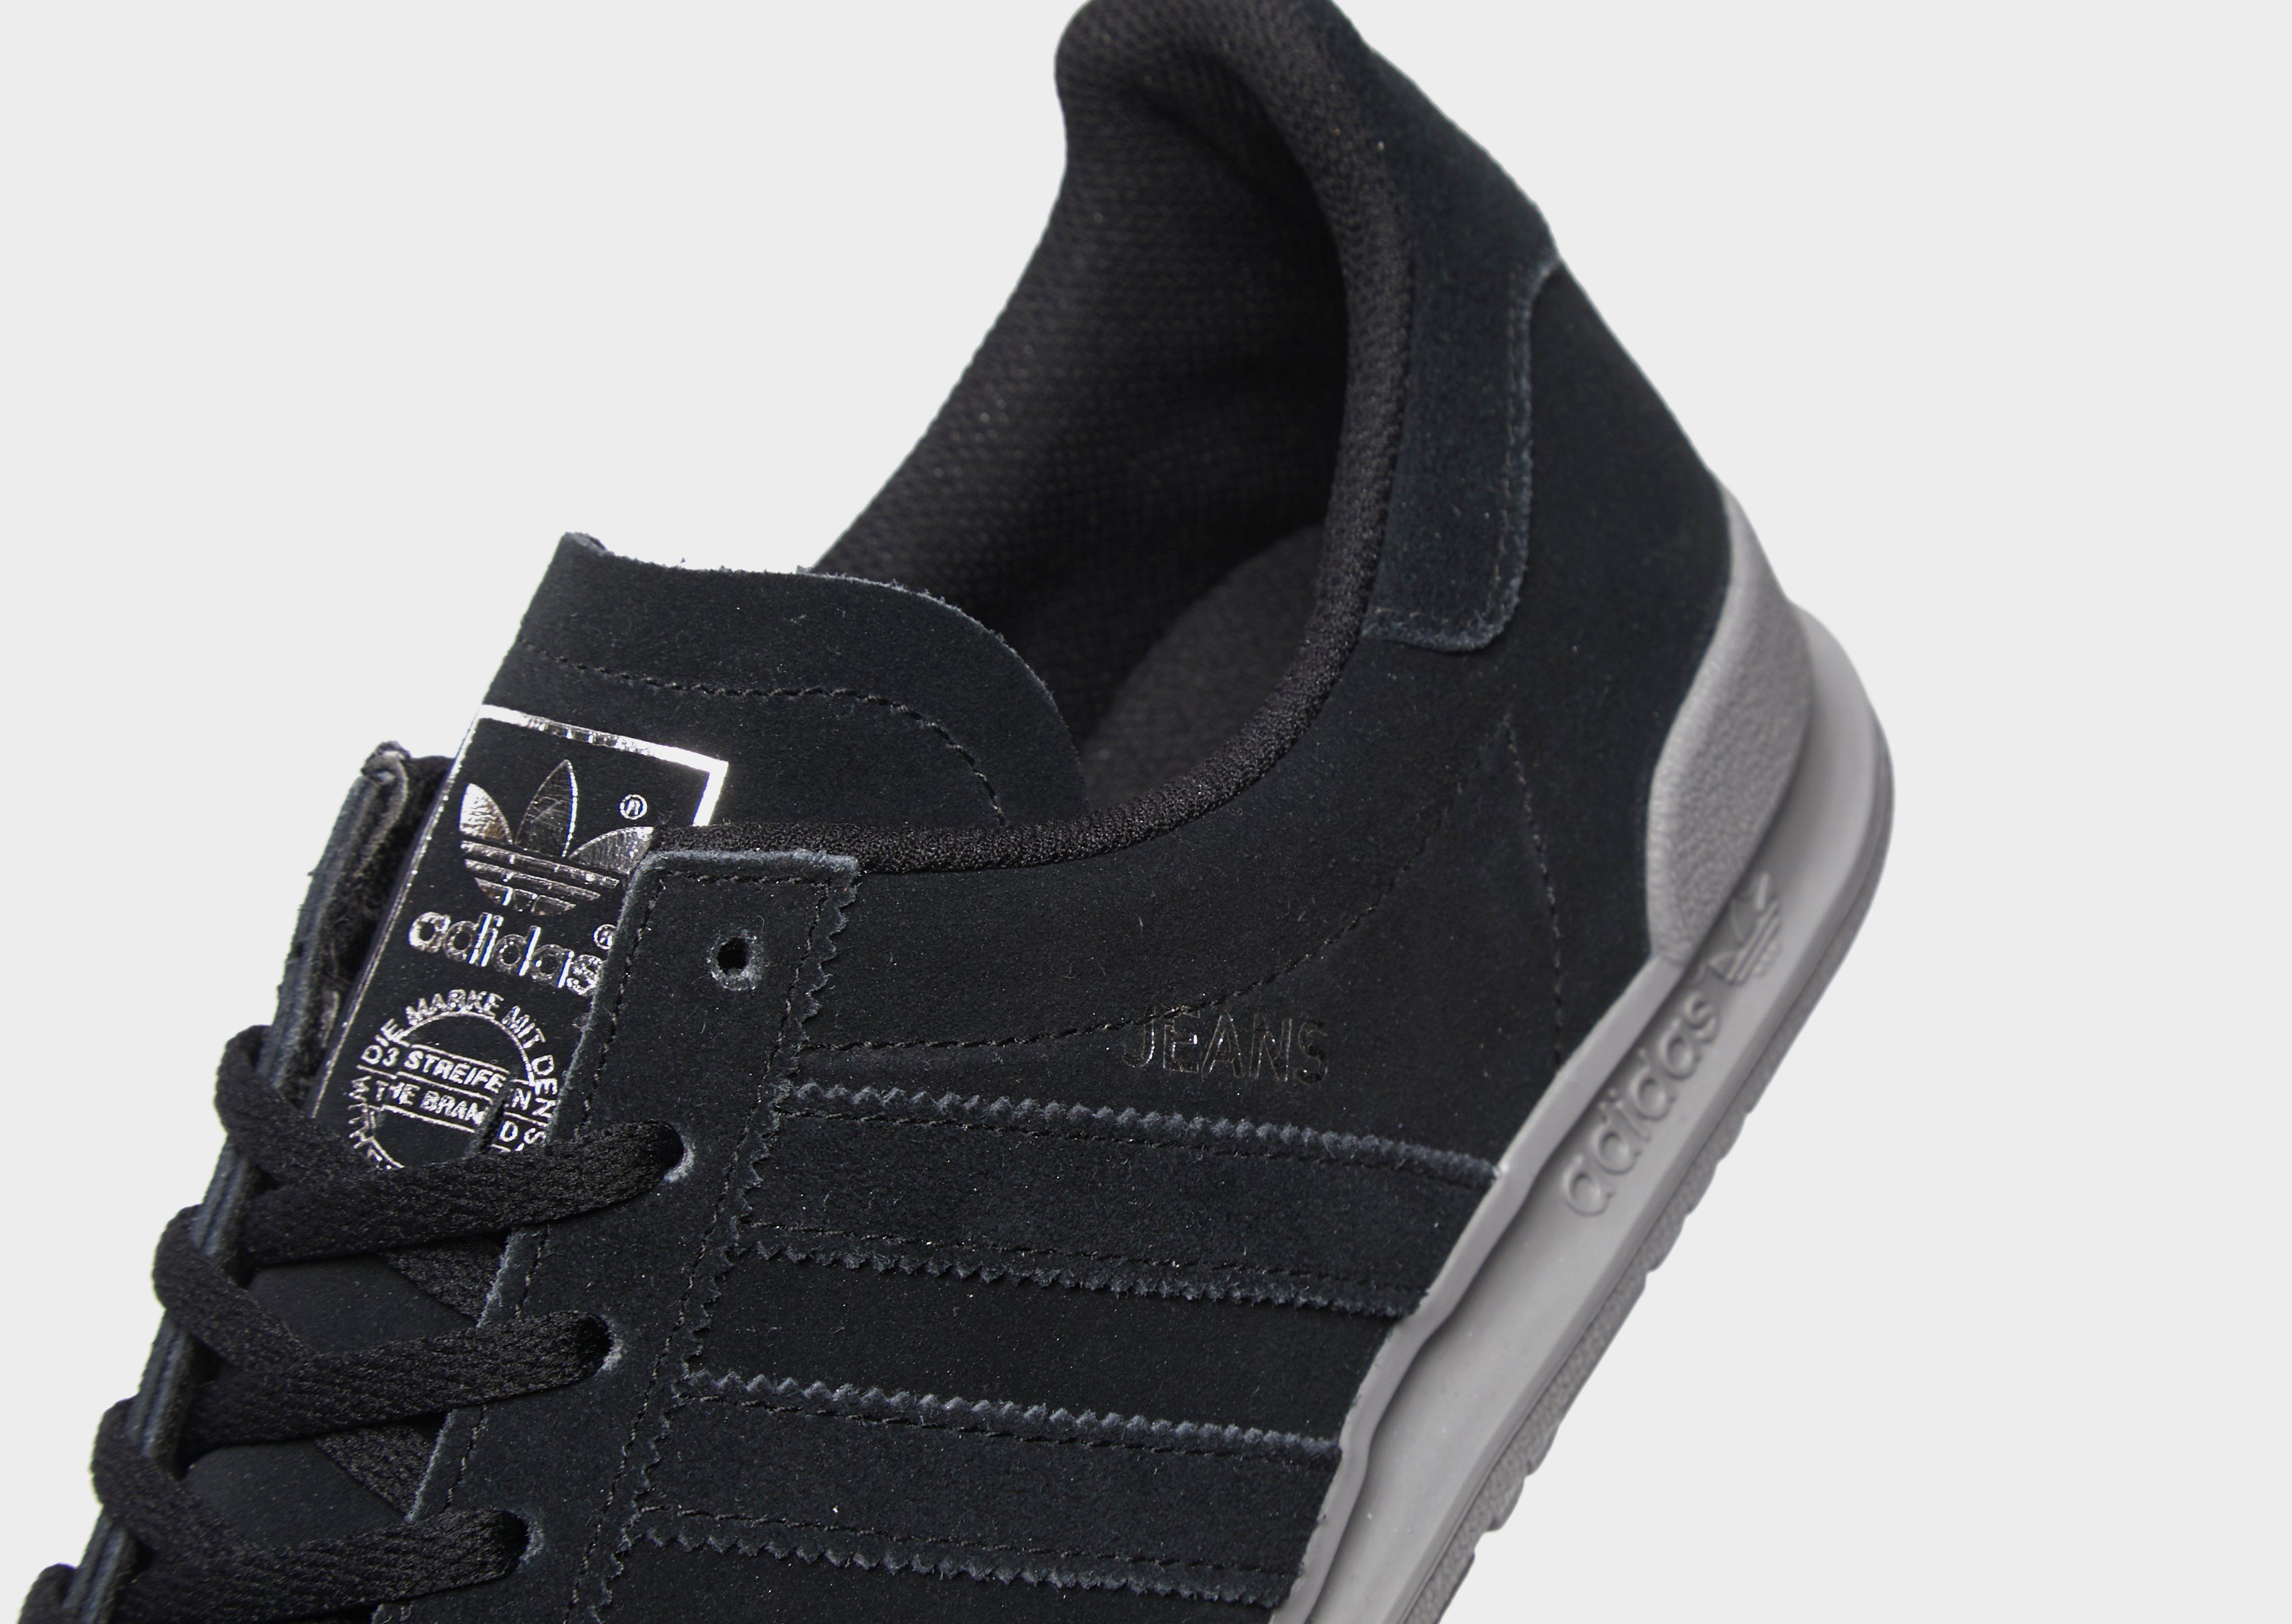 jd sports adidas jeans trainers